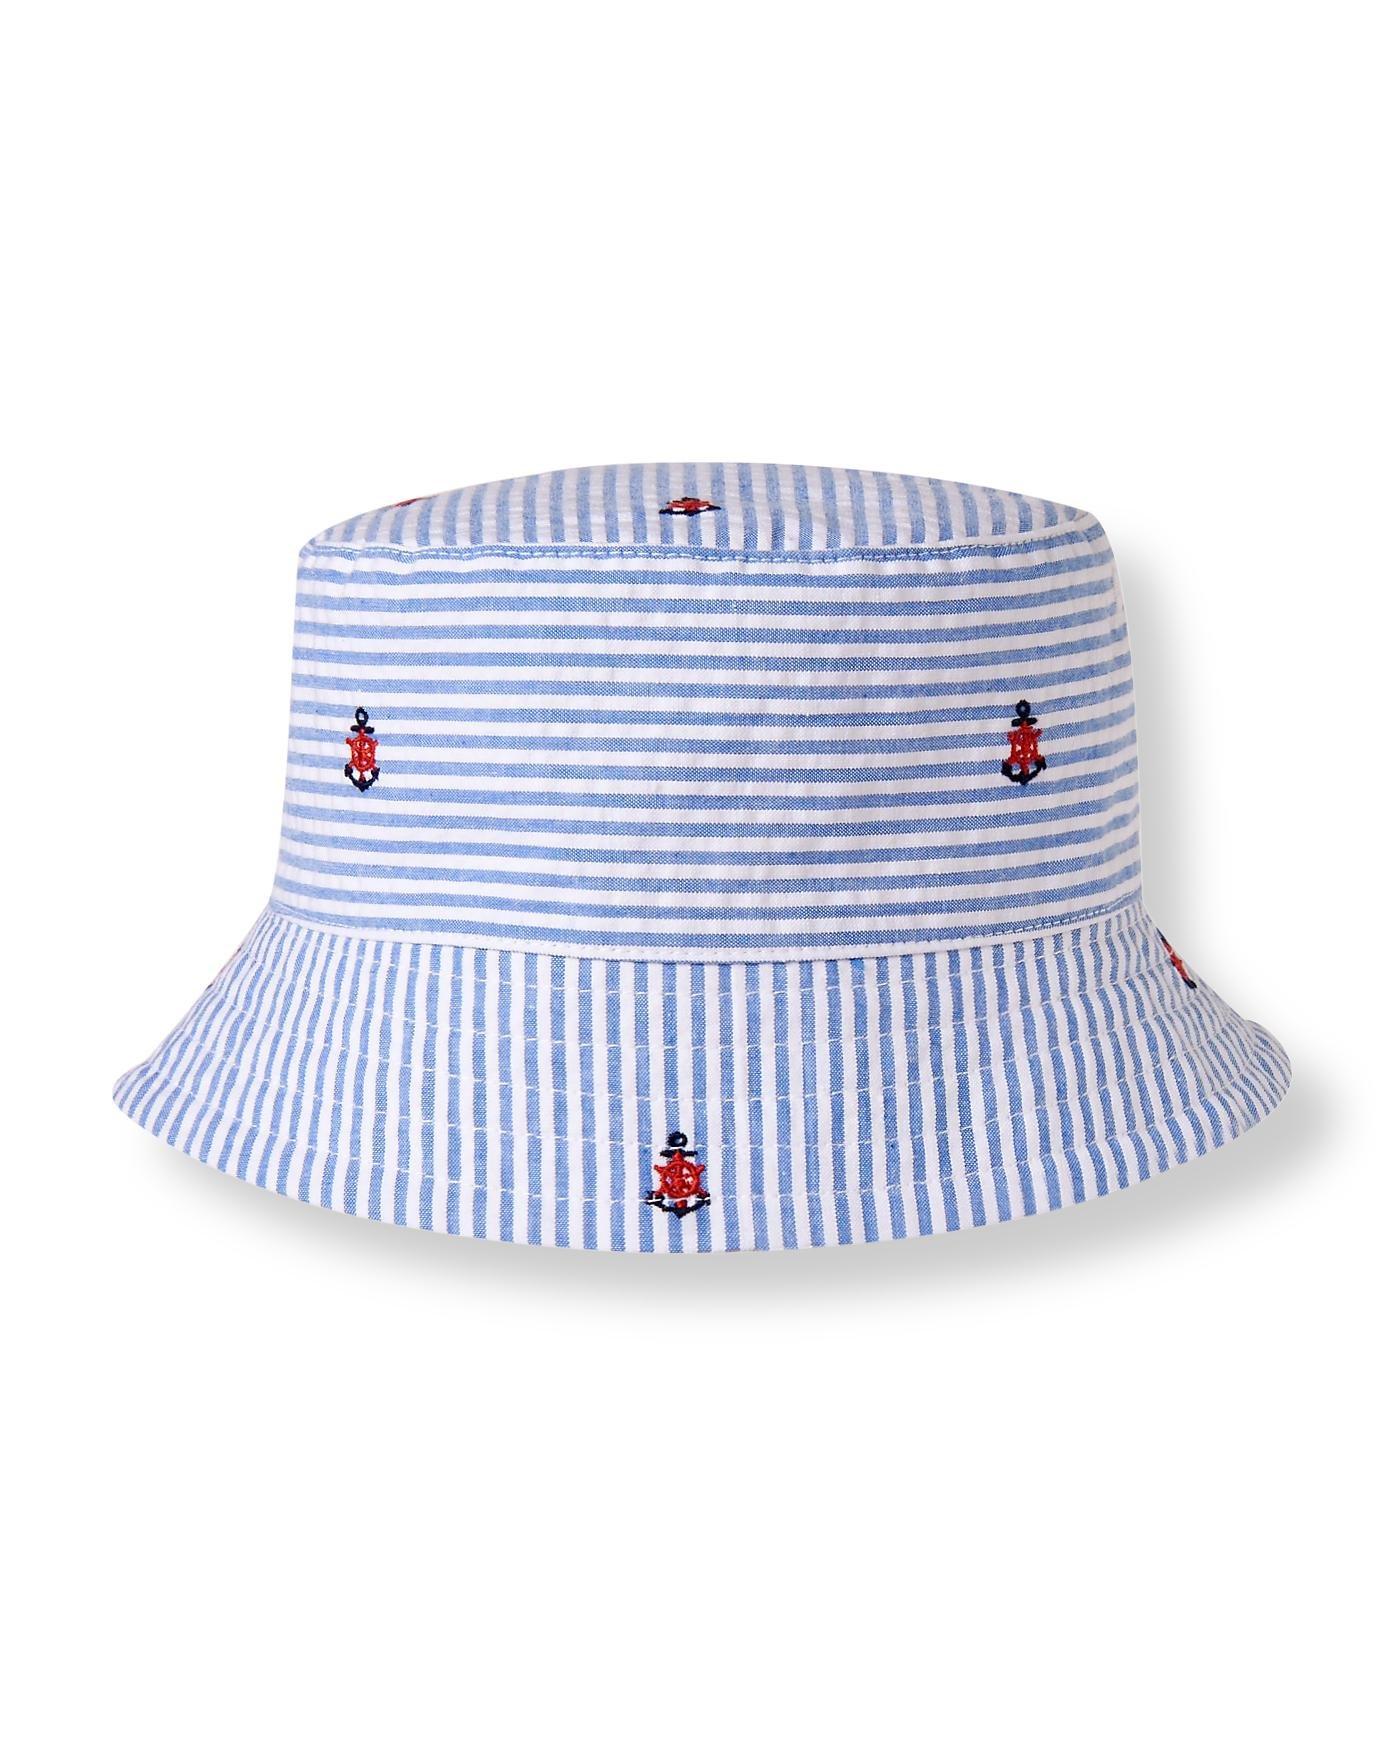 Anchor Striped Bucket Hat image number 0